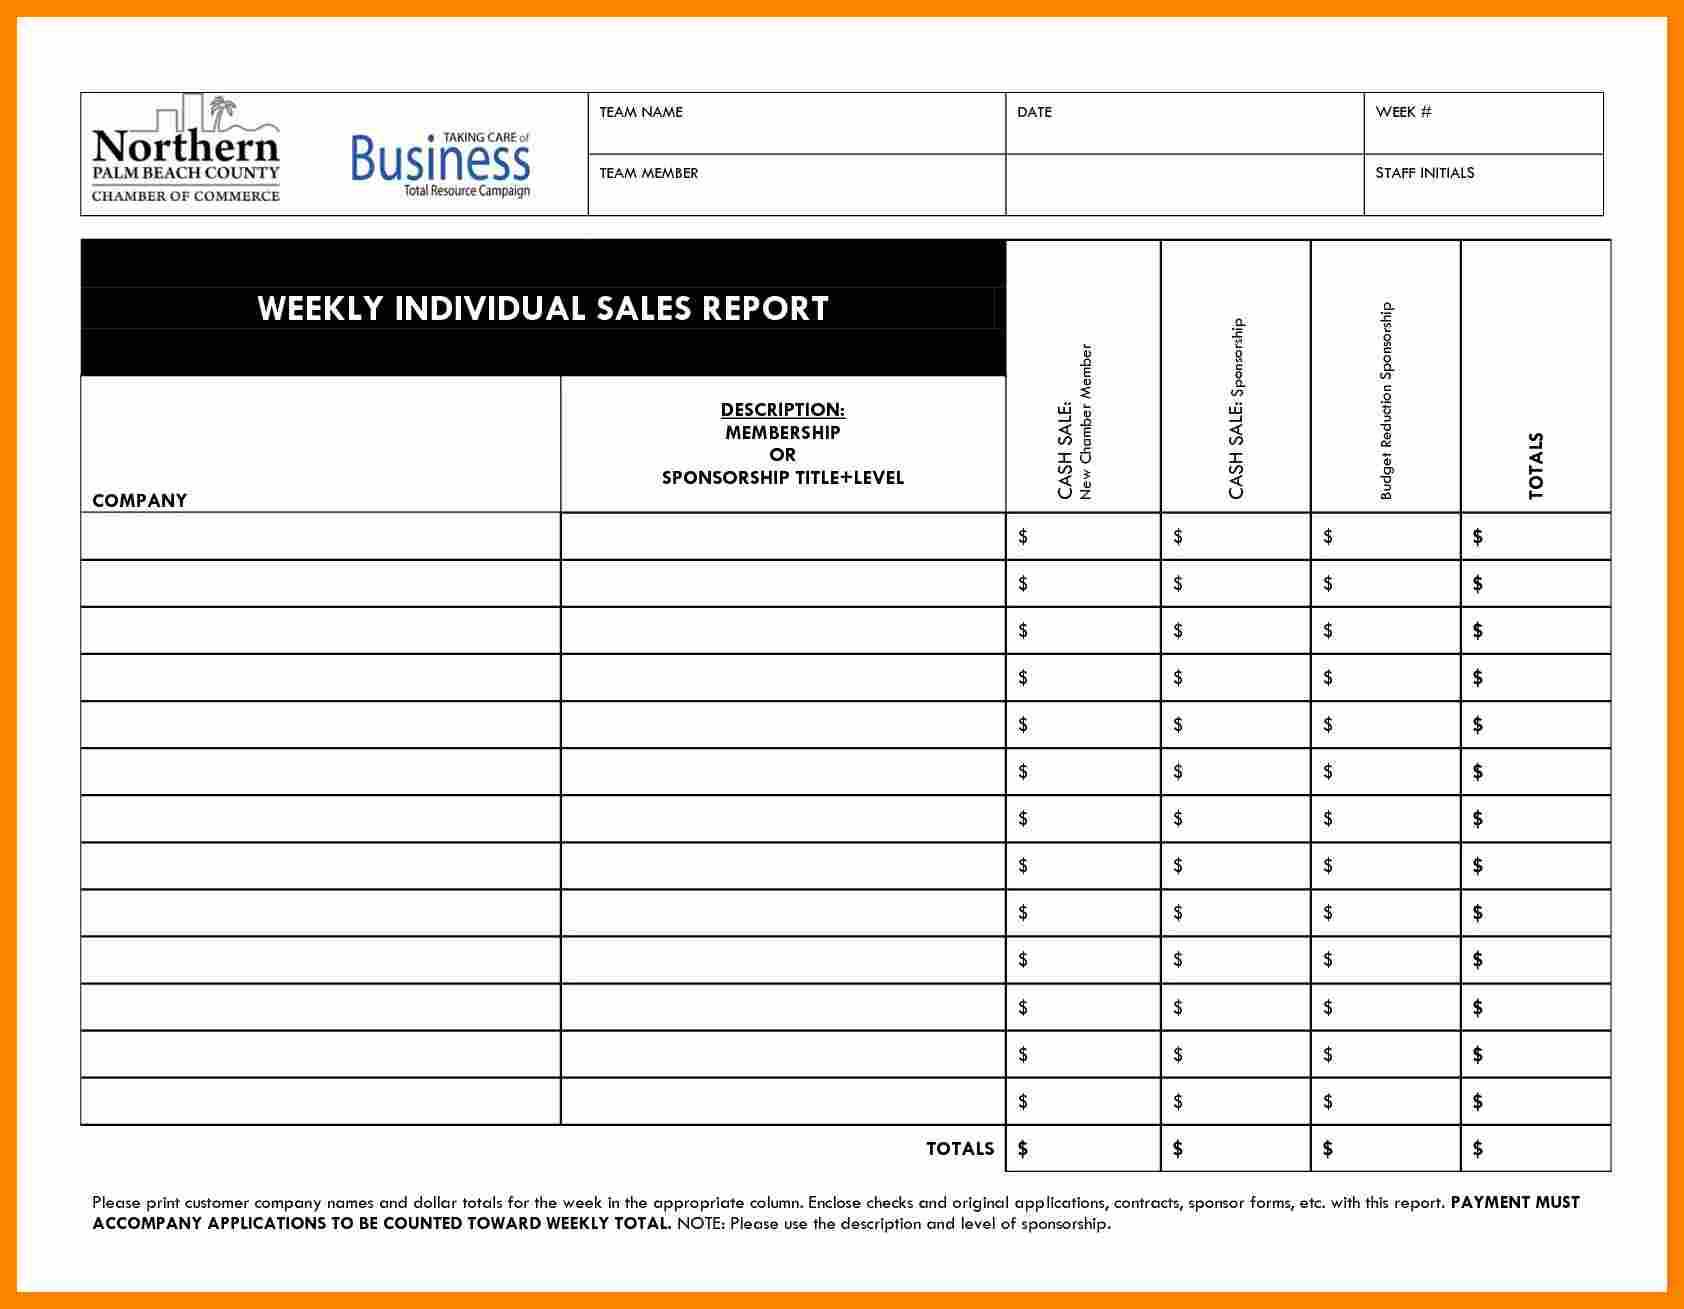 008 Daily Activity Report Template Ideas 9F2Af5008Afa 1 Regarding Sales Activity Report Template Excel